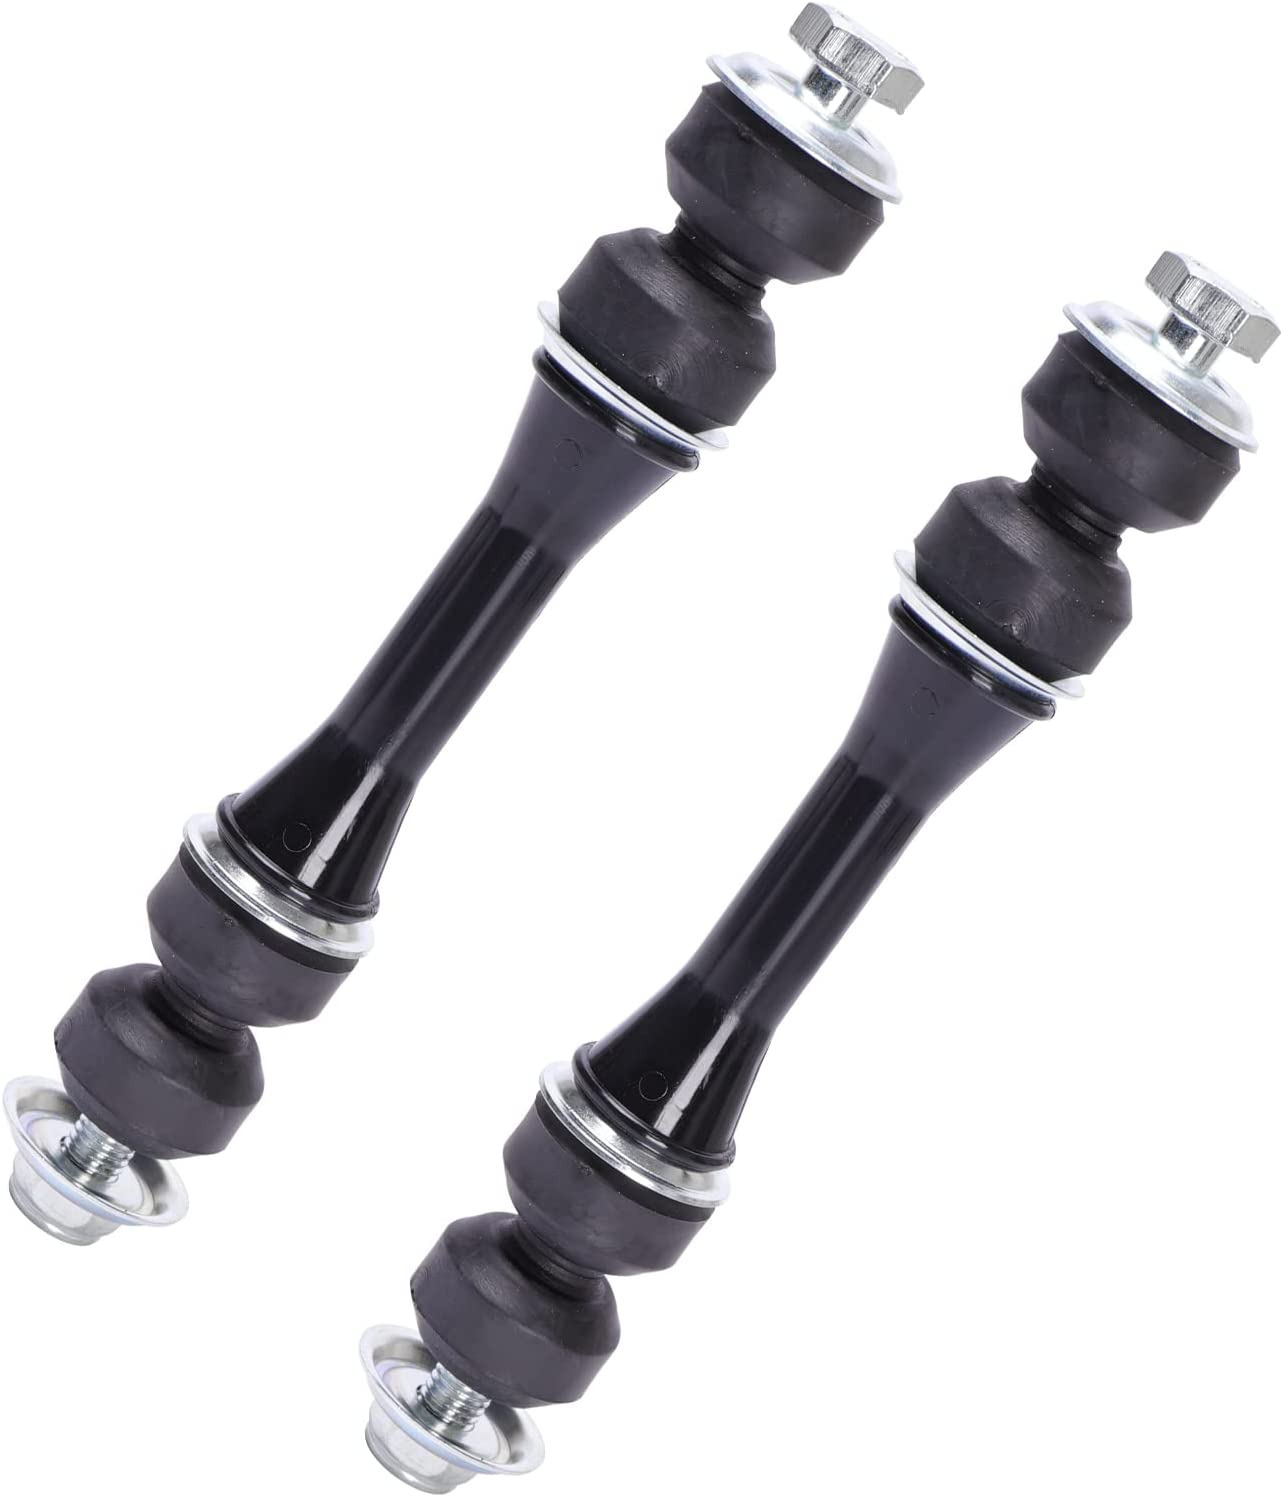 2Pcs K700432 Front Stabilizer Sway Bar Link Replacement for Chevy Silverado Subu